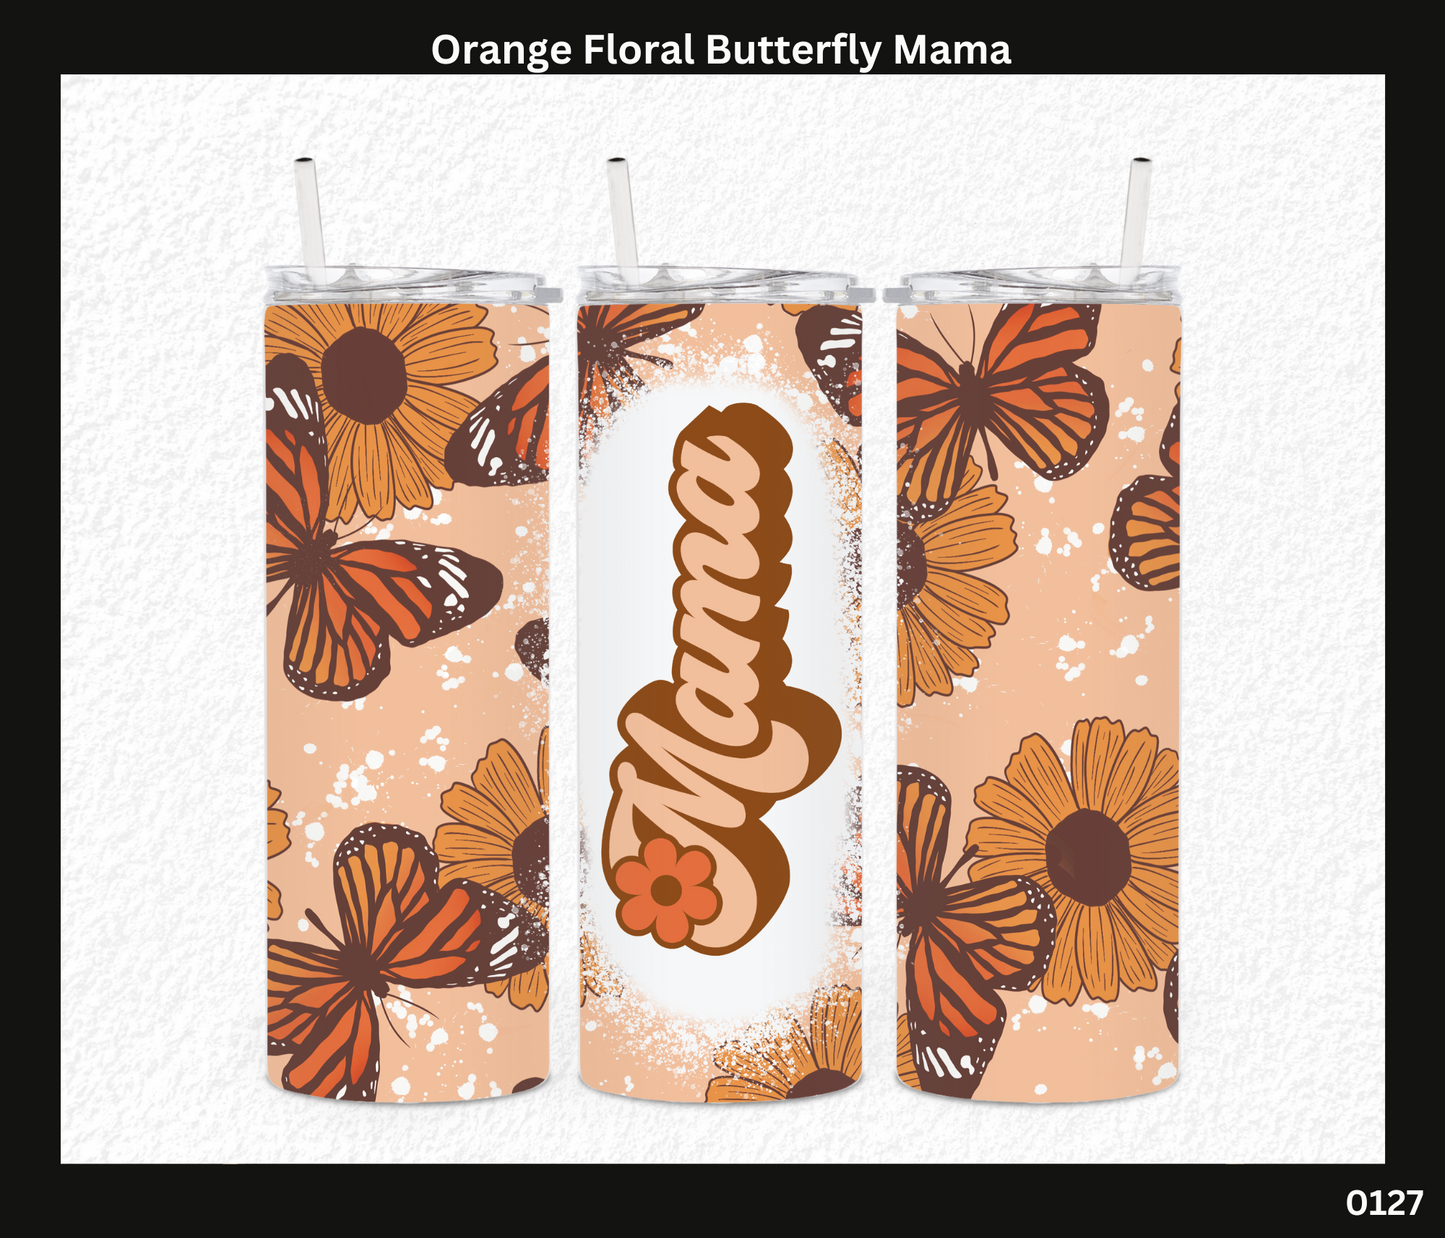 Orange Floral Butterfly Mama